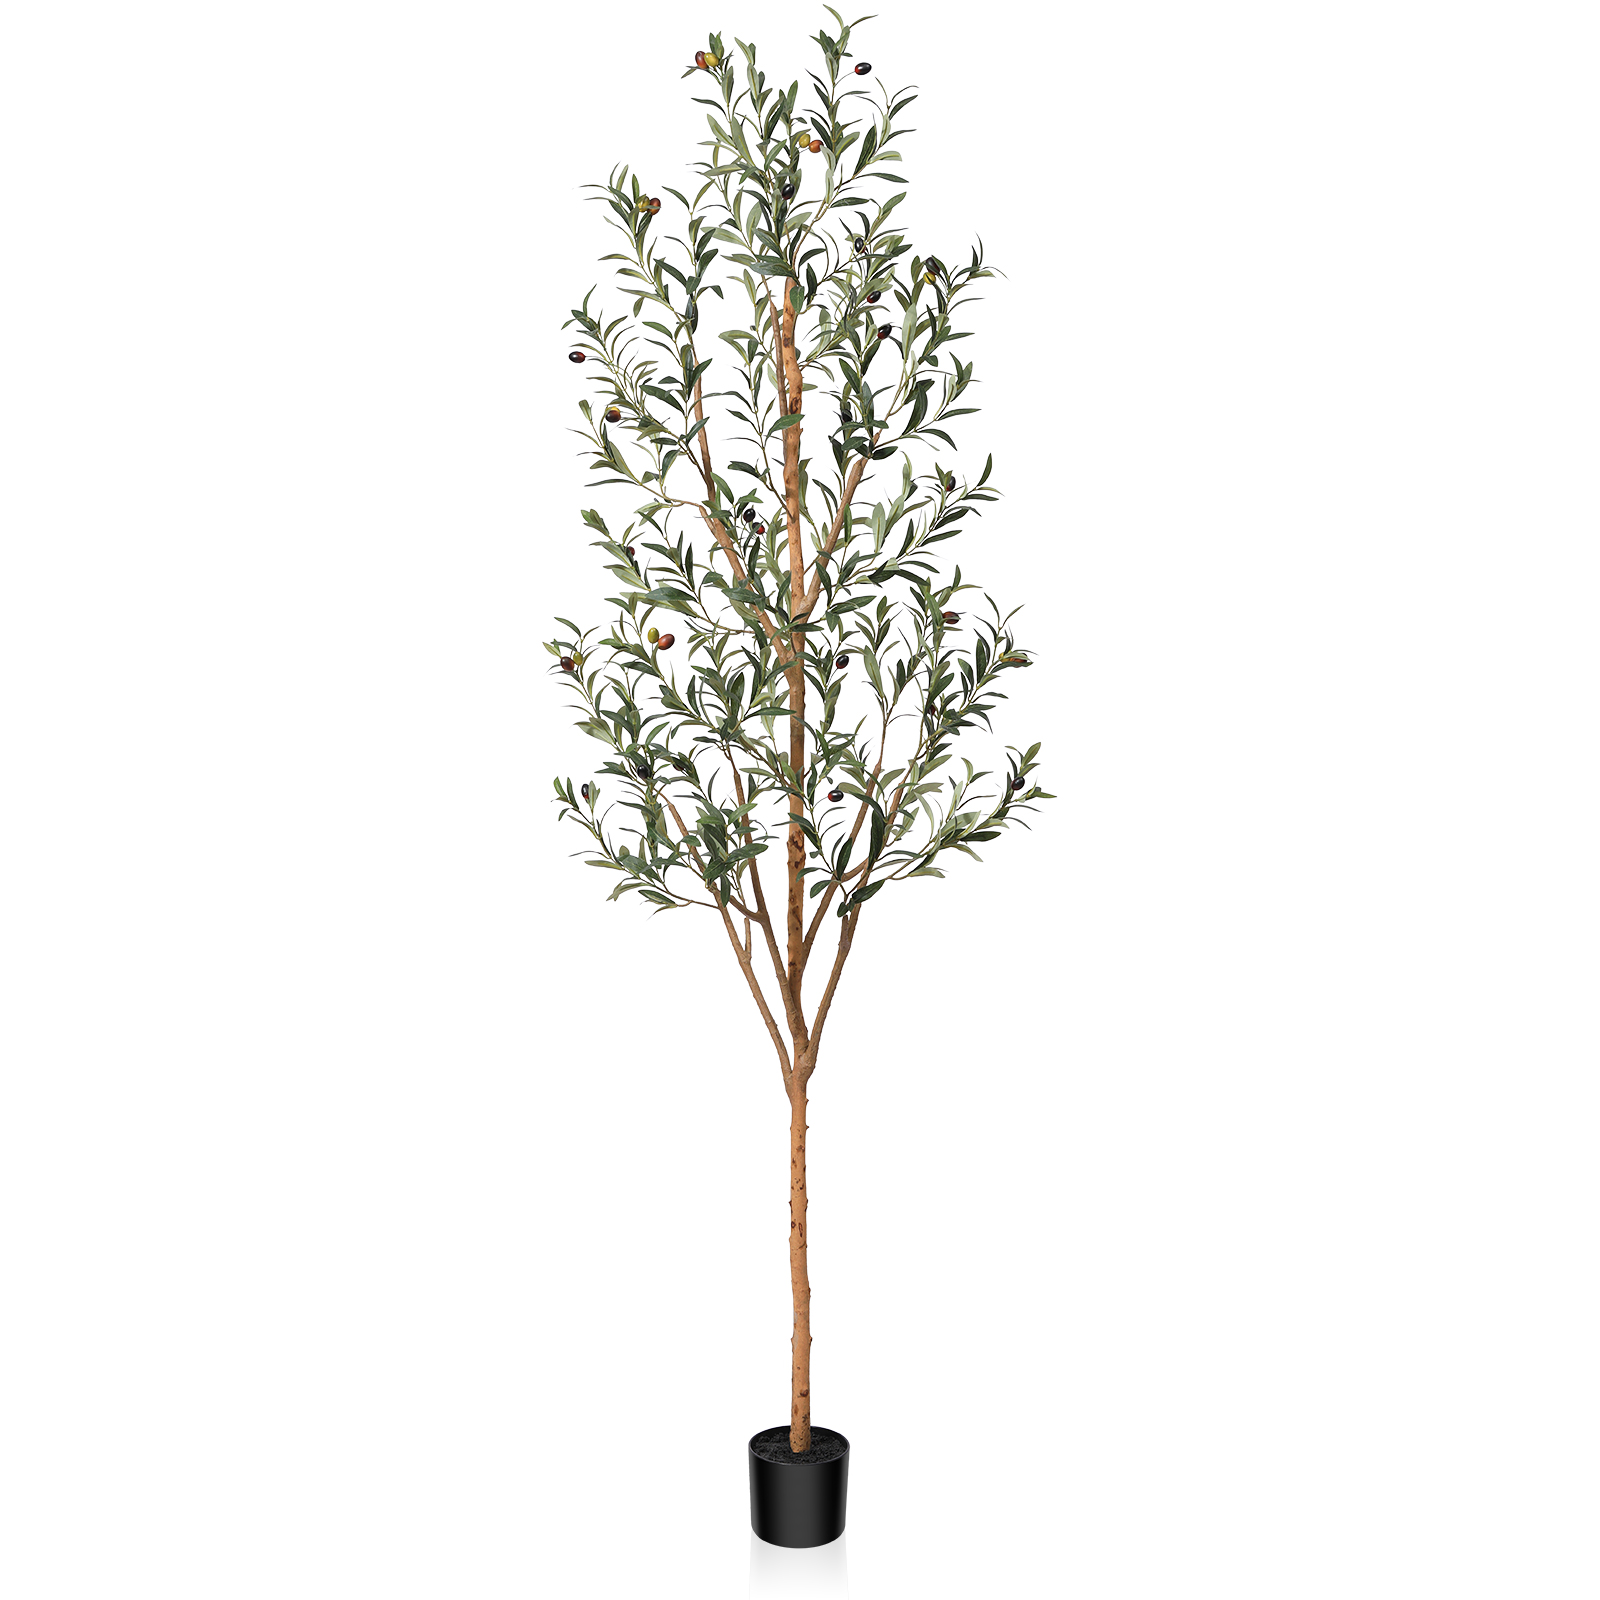 Kazeila Artificial Olive Tree 7FT Tall Faux Silk Plant for Home Office Decor Indoor Fake Potted Tree with Wood Trunk and Fruits, Size: 7', Green